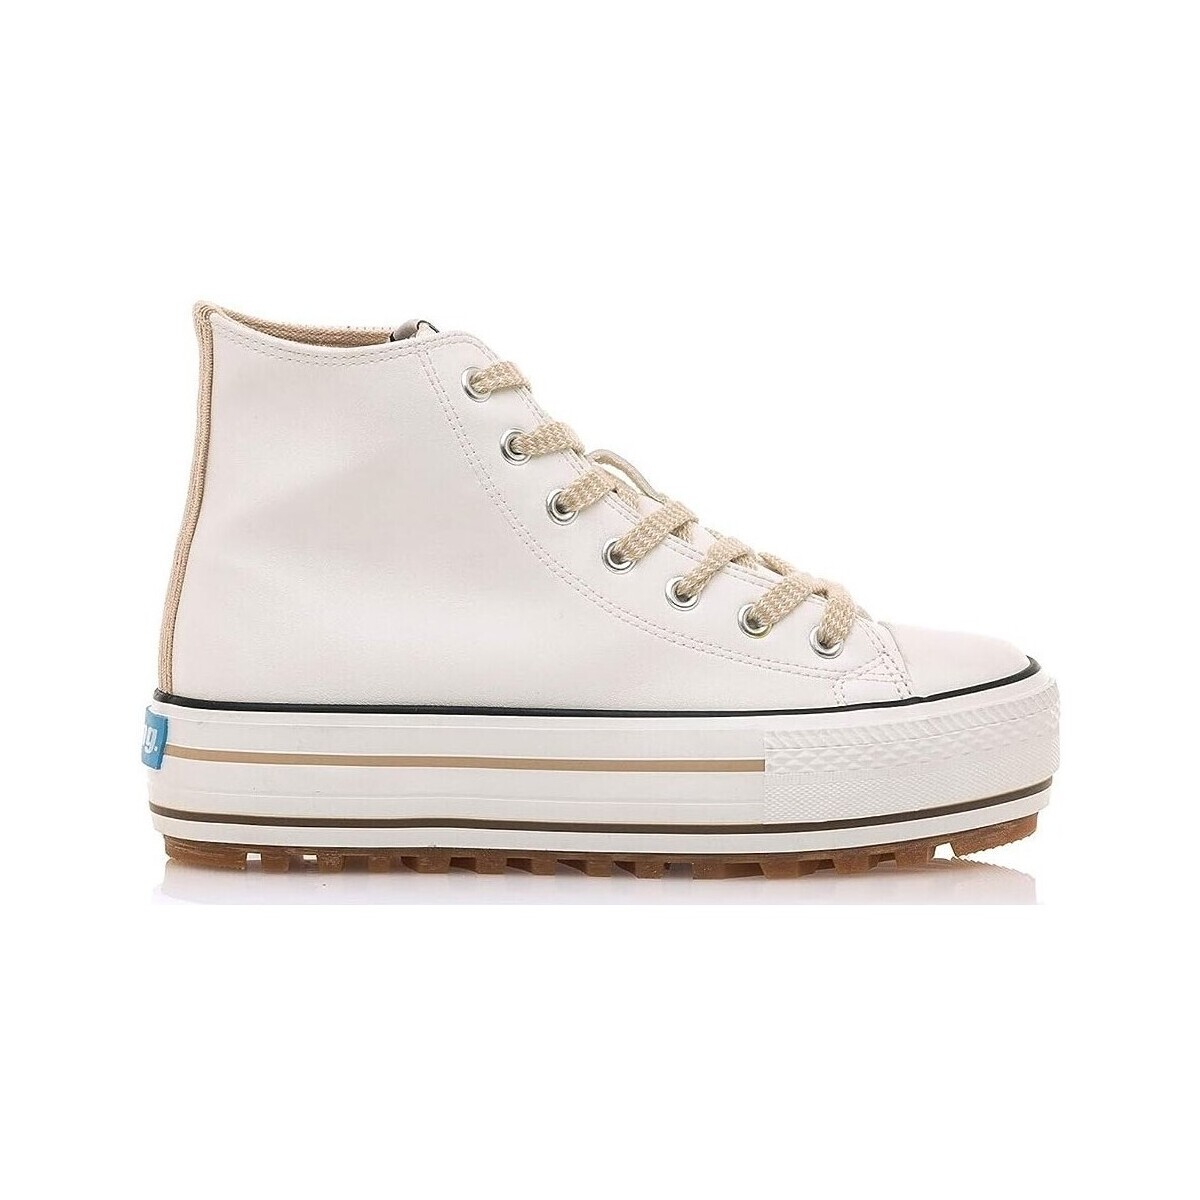 MTNG Blanc SNEAKERS 60298 rKvLqVcB